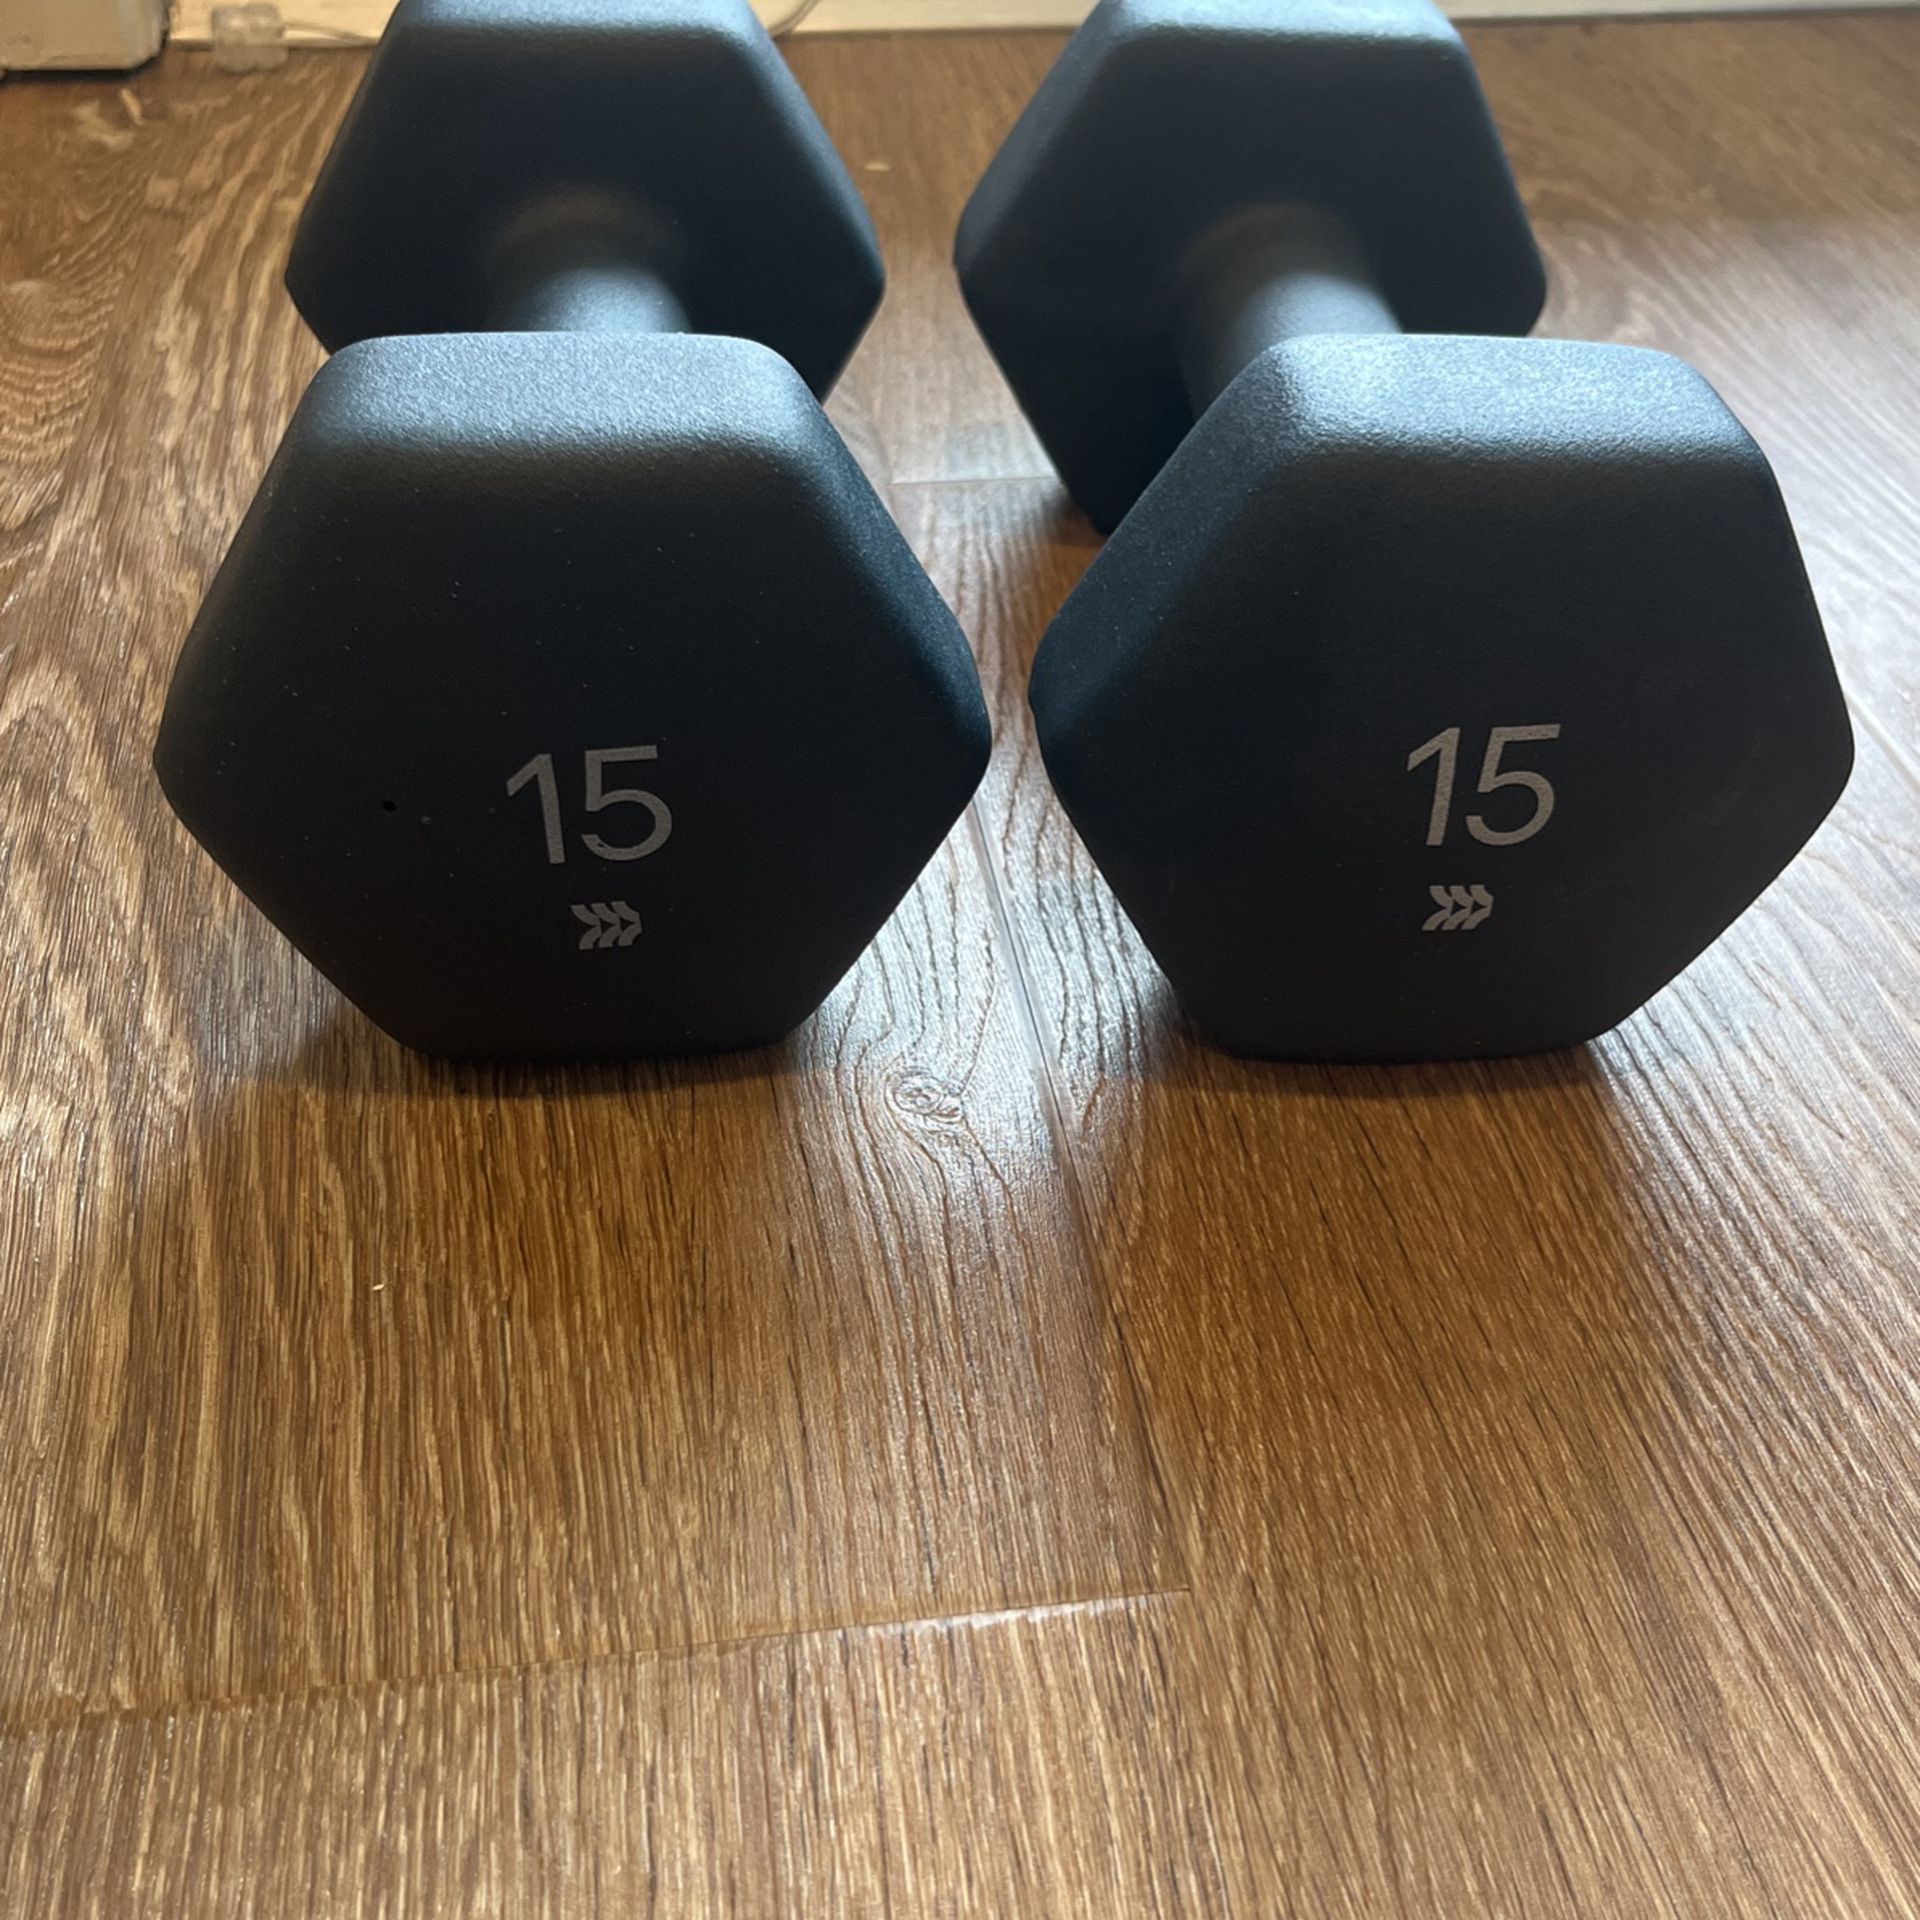 Weights, Workout Equipment, 15 Pounds